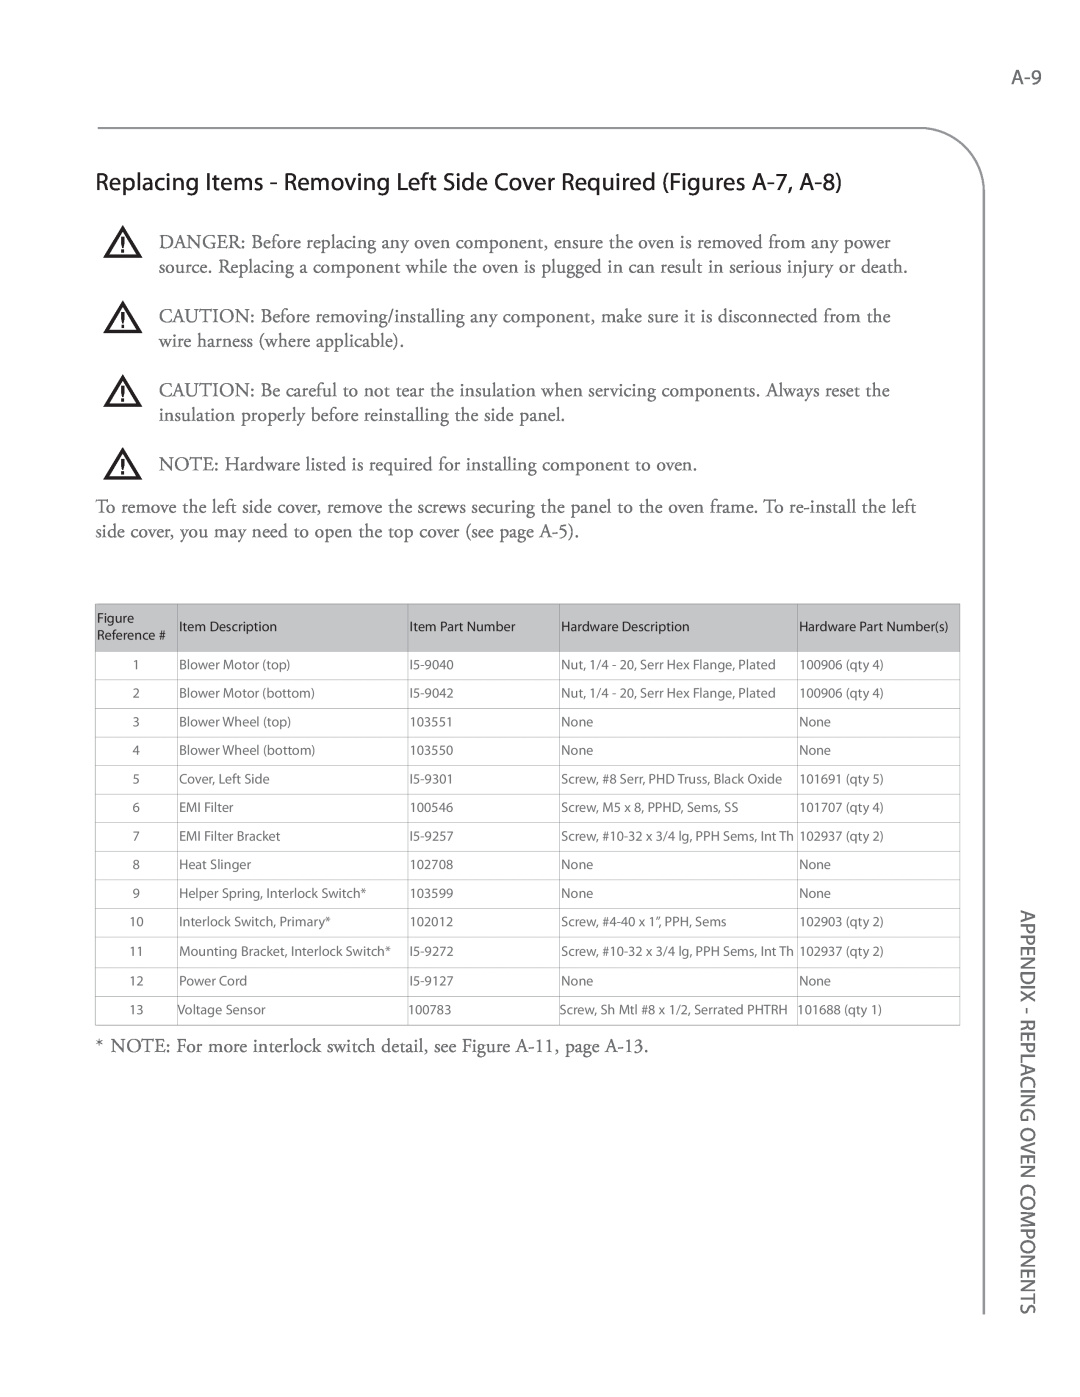 Turbo Chef Technologies i5 service manual Replacing Items - Removing Left Side Cover Required Figures A-7, A-8 